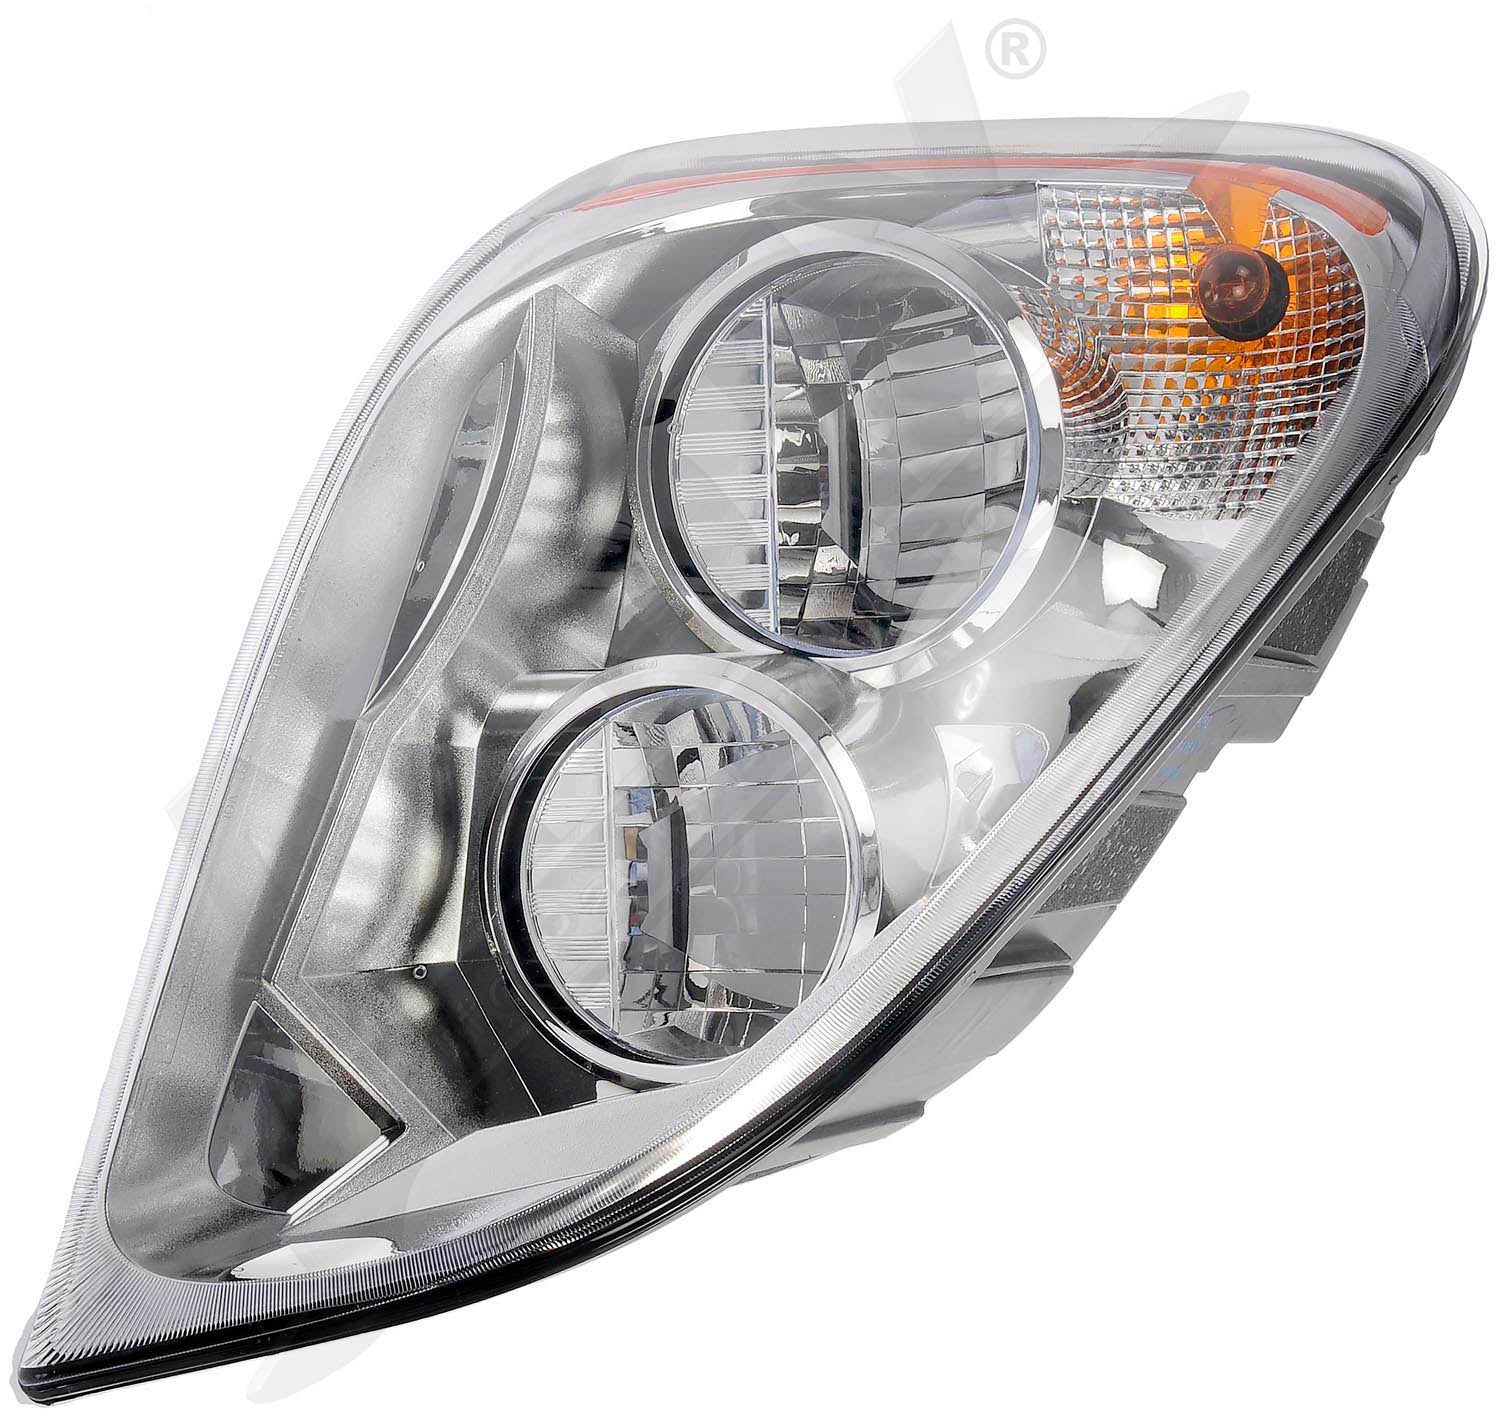 APDTY, APDTY 144806 LED Headlight - Right Side Replaces TL 27600C